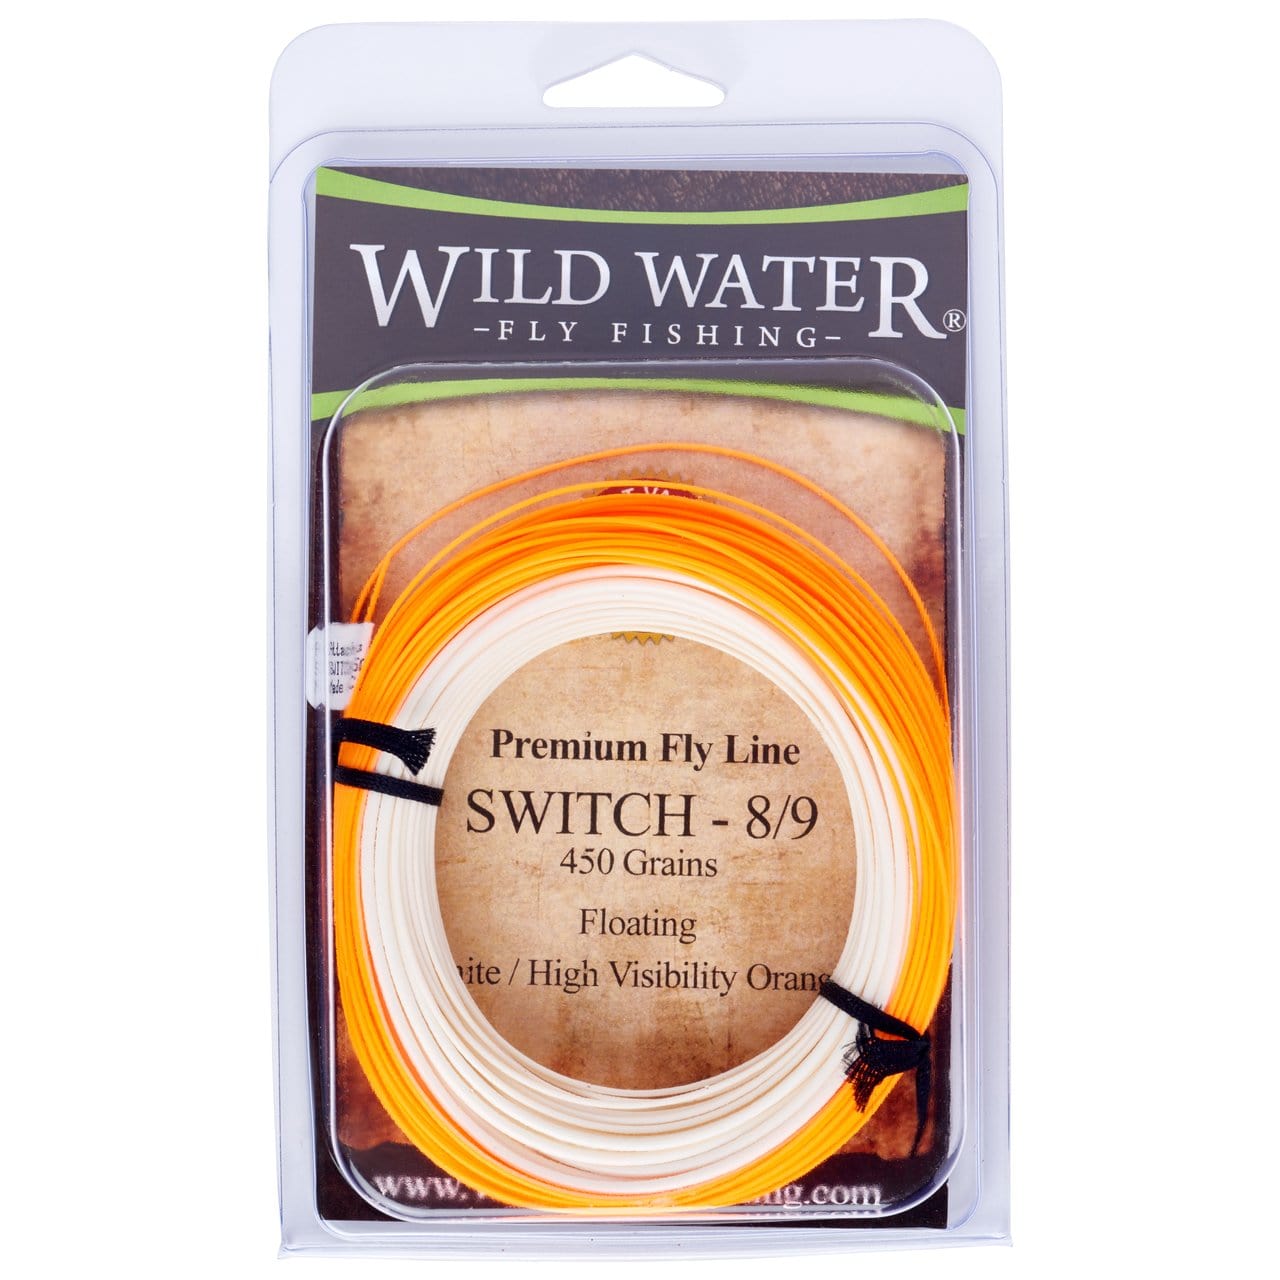 Wild Water Fly Fishing, 8/9F Switch Line, 450 grains